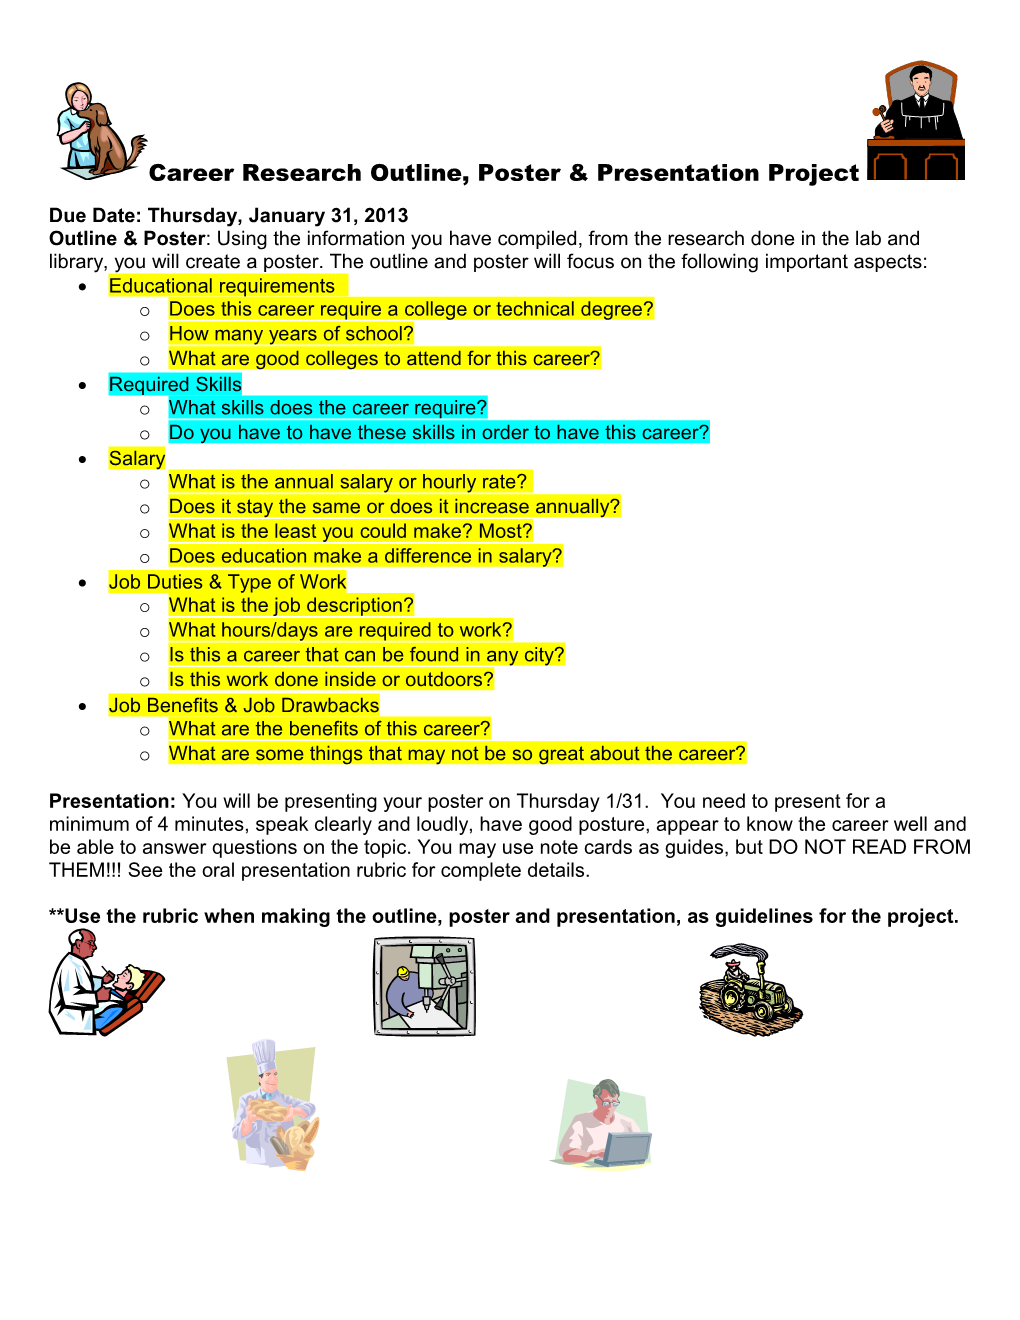 Career Research Poster Project & Presentation